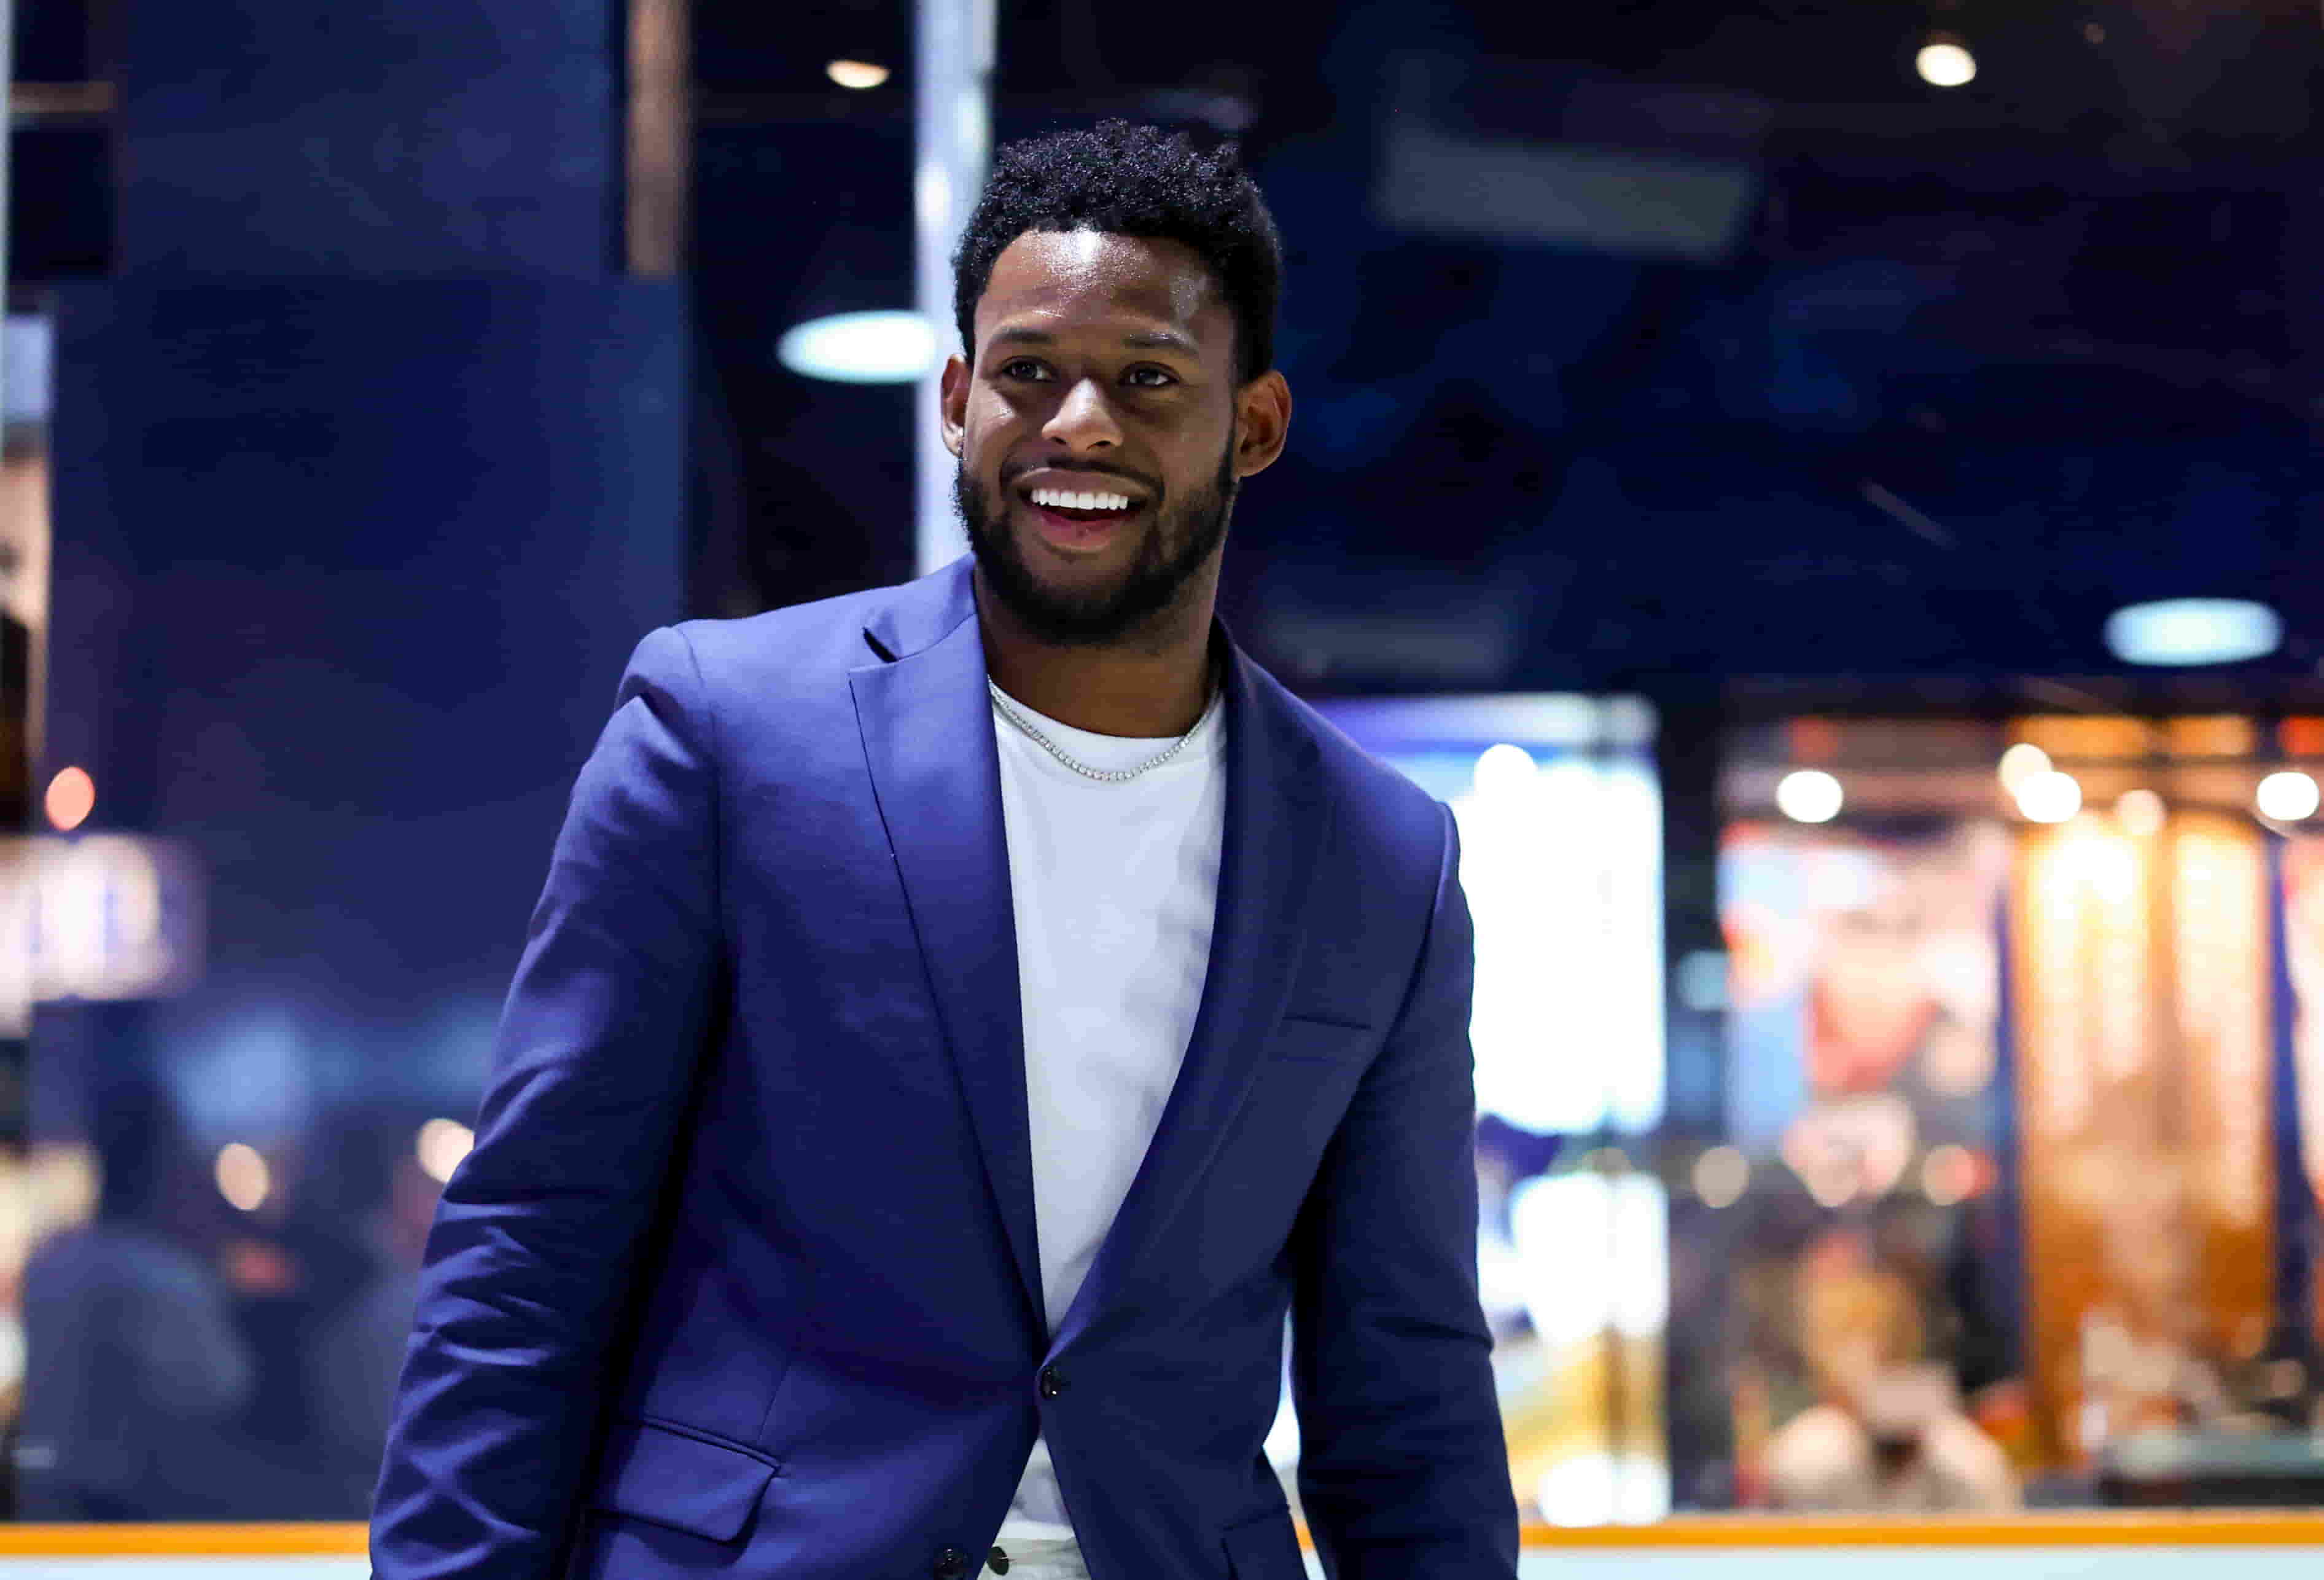 Juju wearing a blue suit on a white t-shirt and smiling.